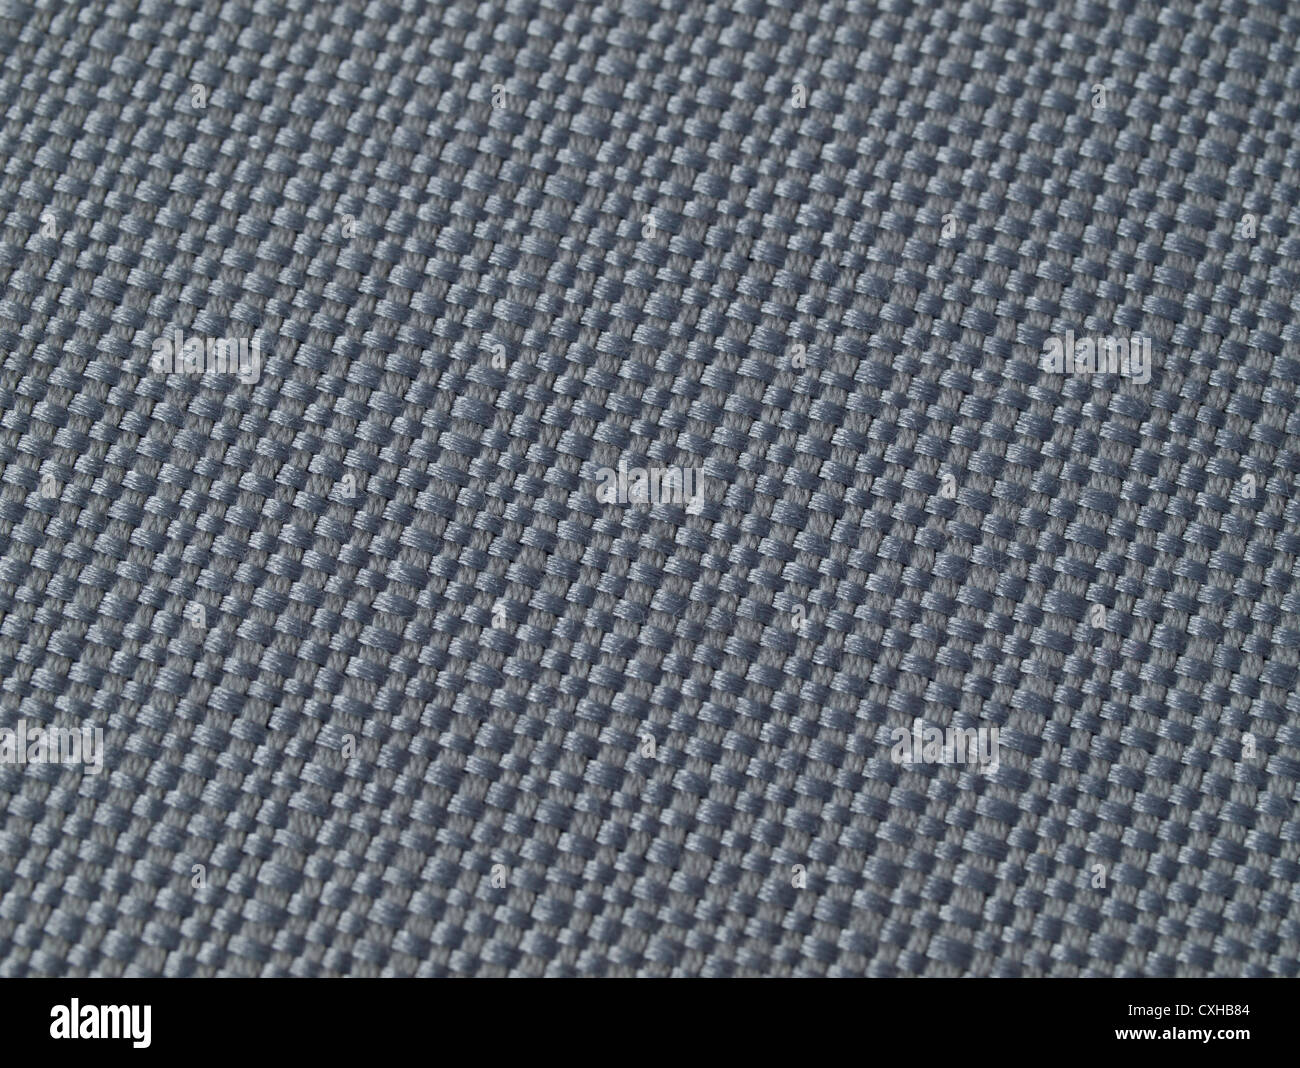 Gray fiber detail, magnified Stock Photo